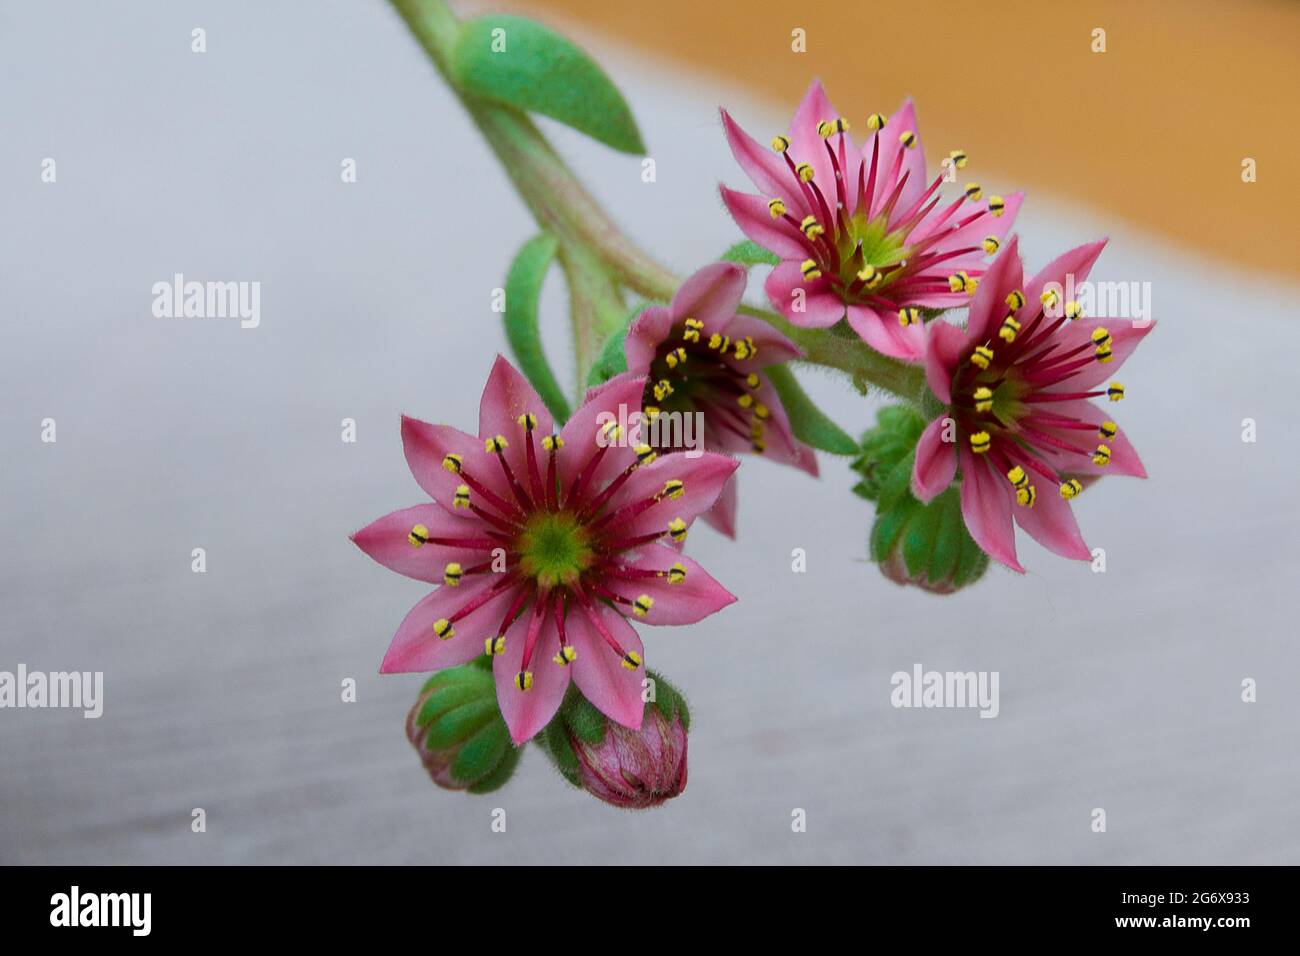 Close-up of tiny pink flowers on a cactus Stock Photo